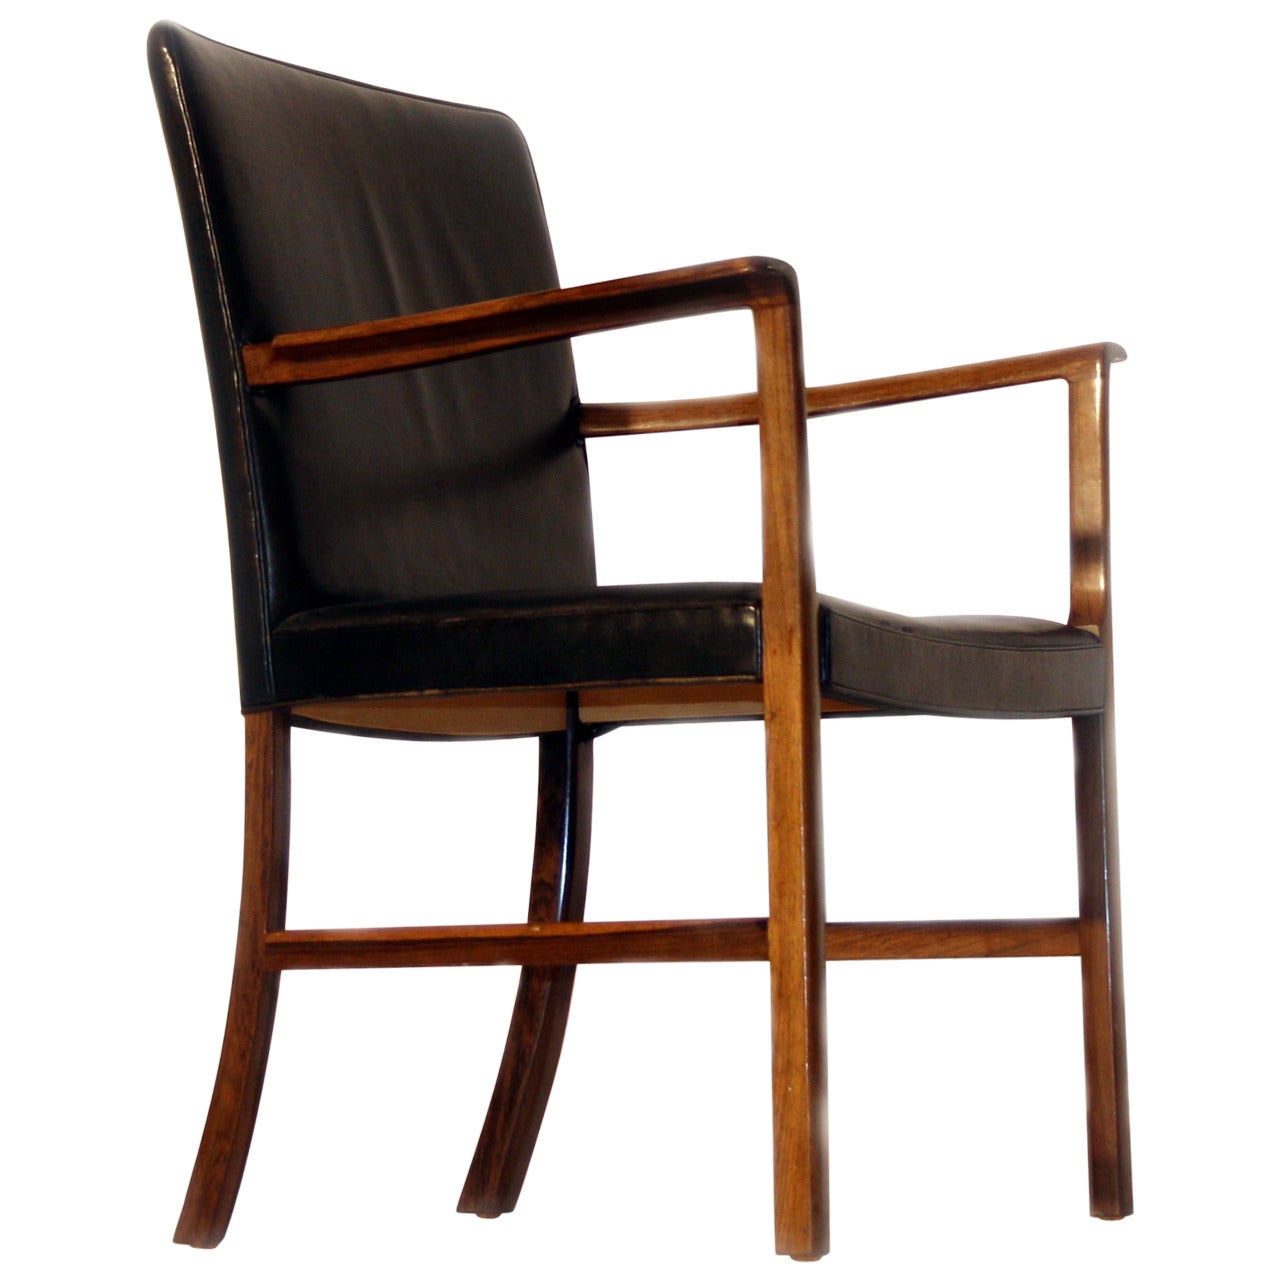 Ole Wanscher Rosewood Desk Chair, circa 1950 For Sale